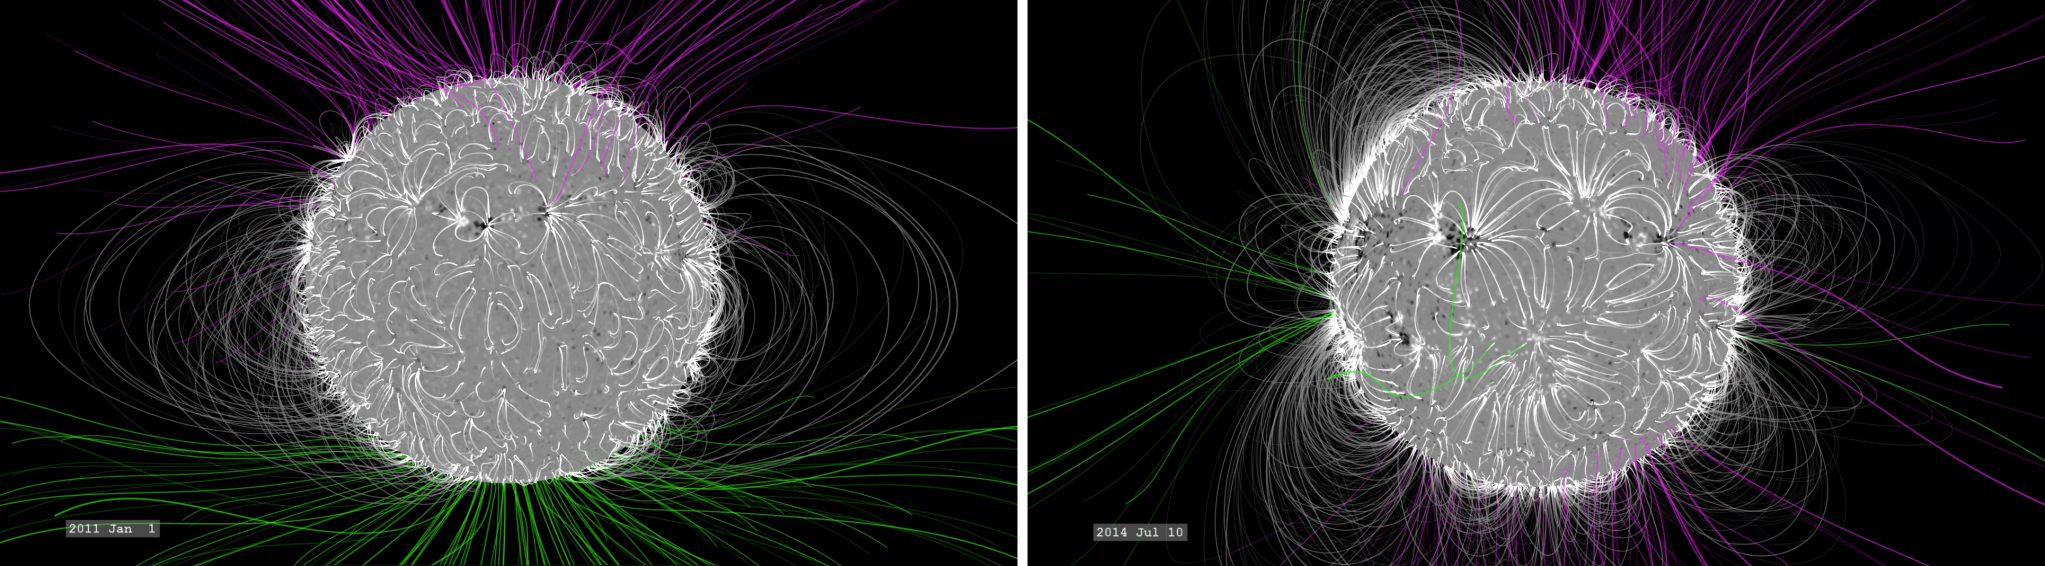 comparison of solar magnetic field lines in 2011 (left) and 2014